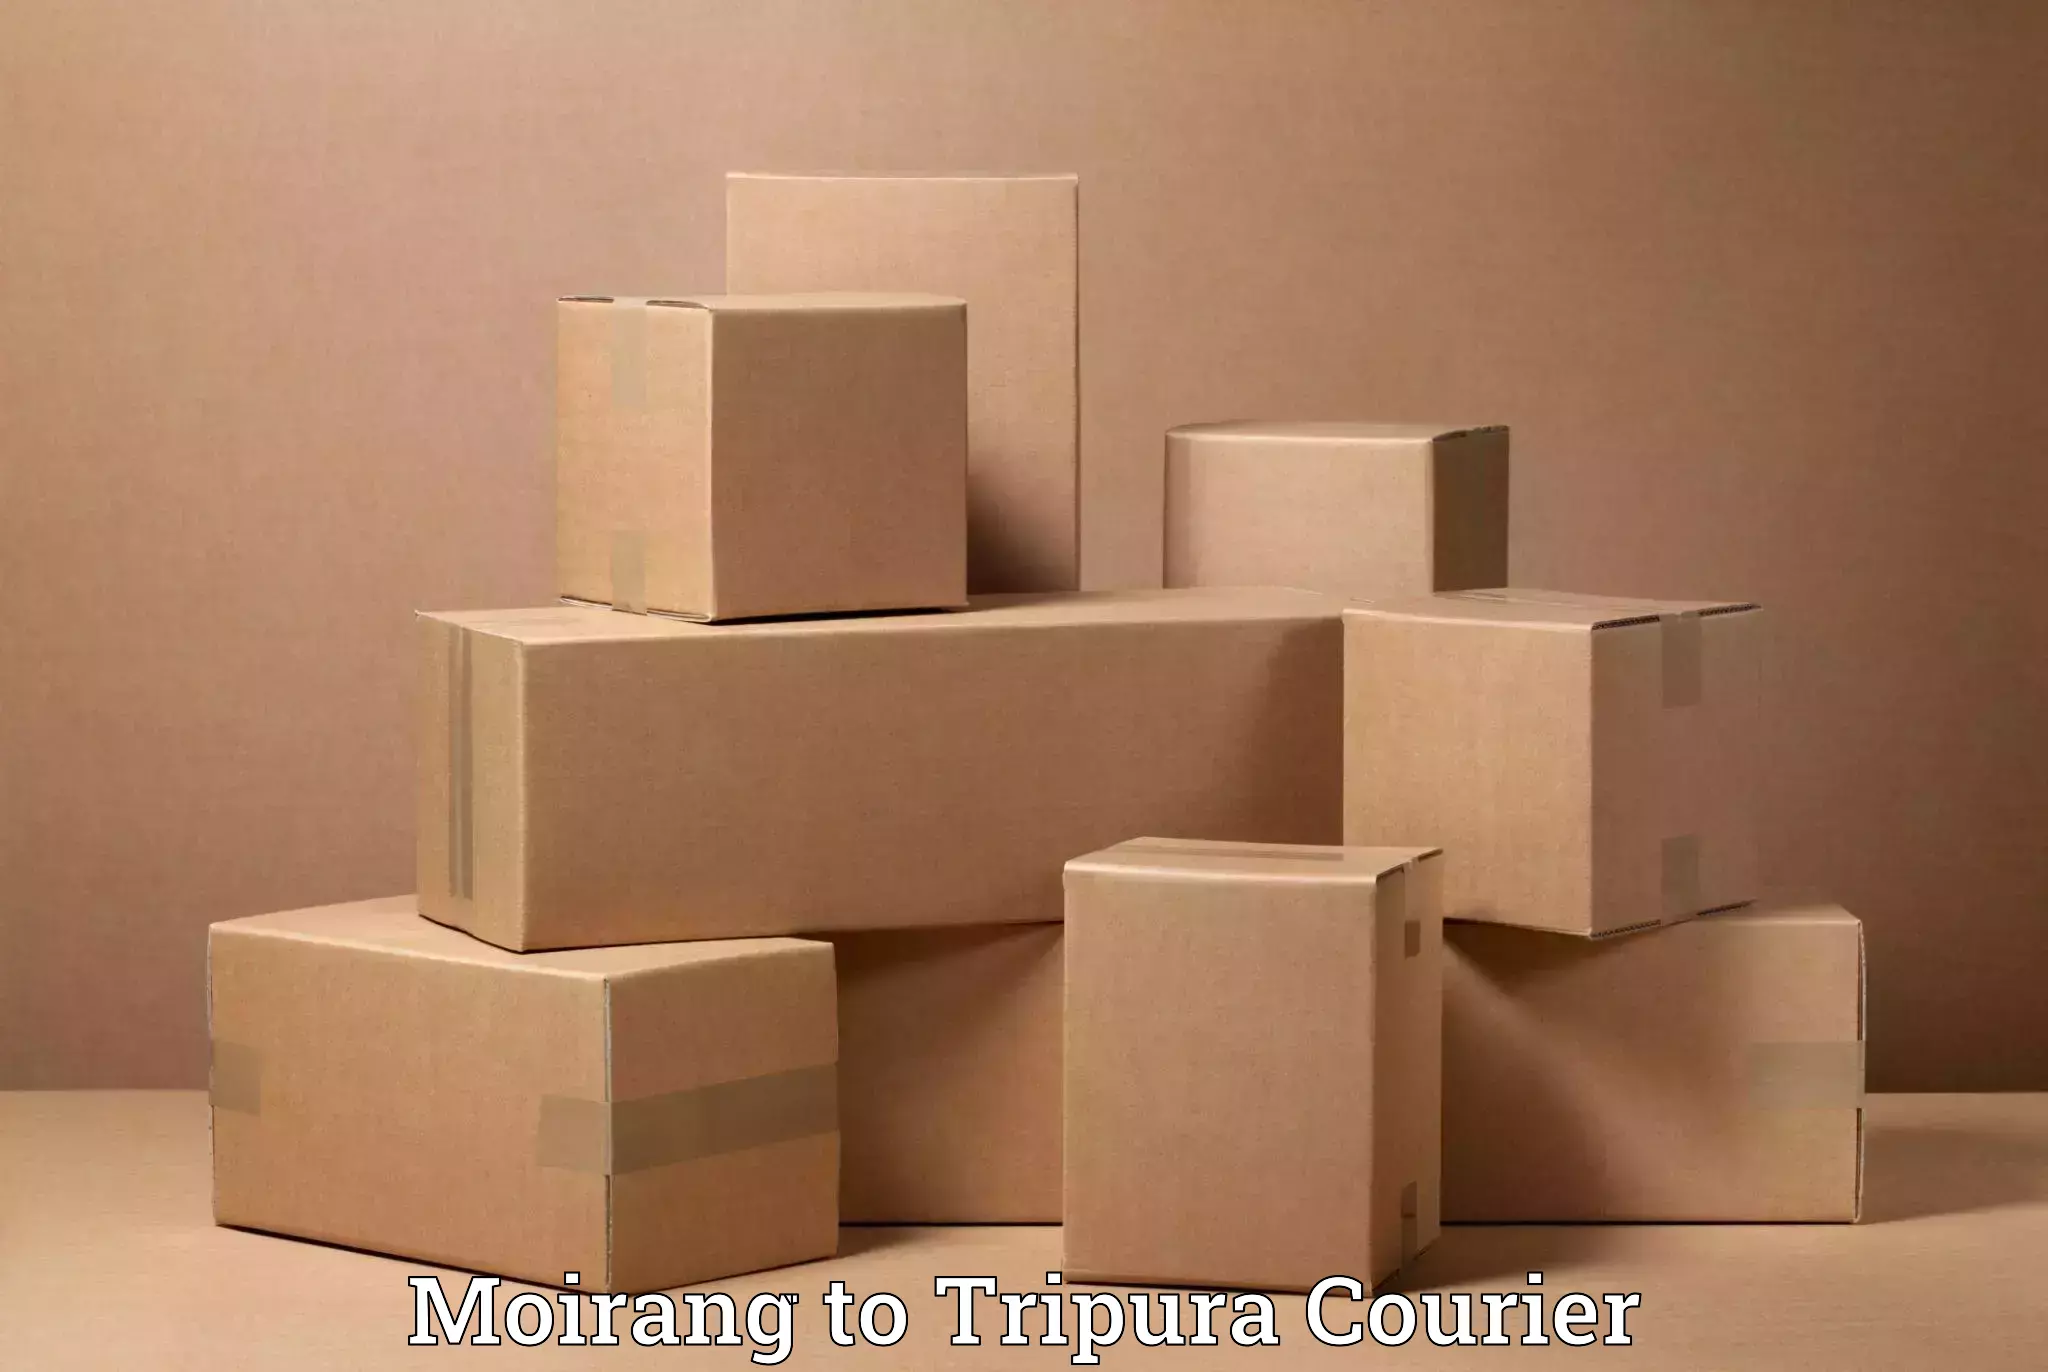 Hassle-free relocation Moirang to Tripura